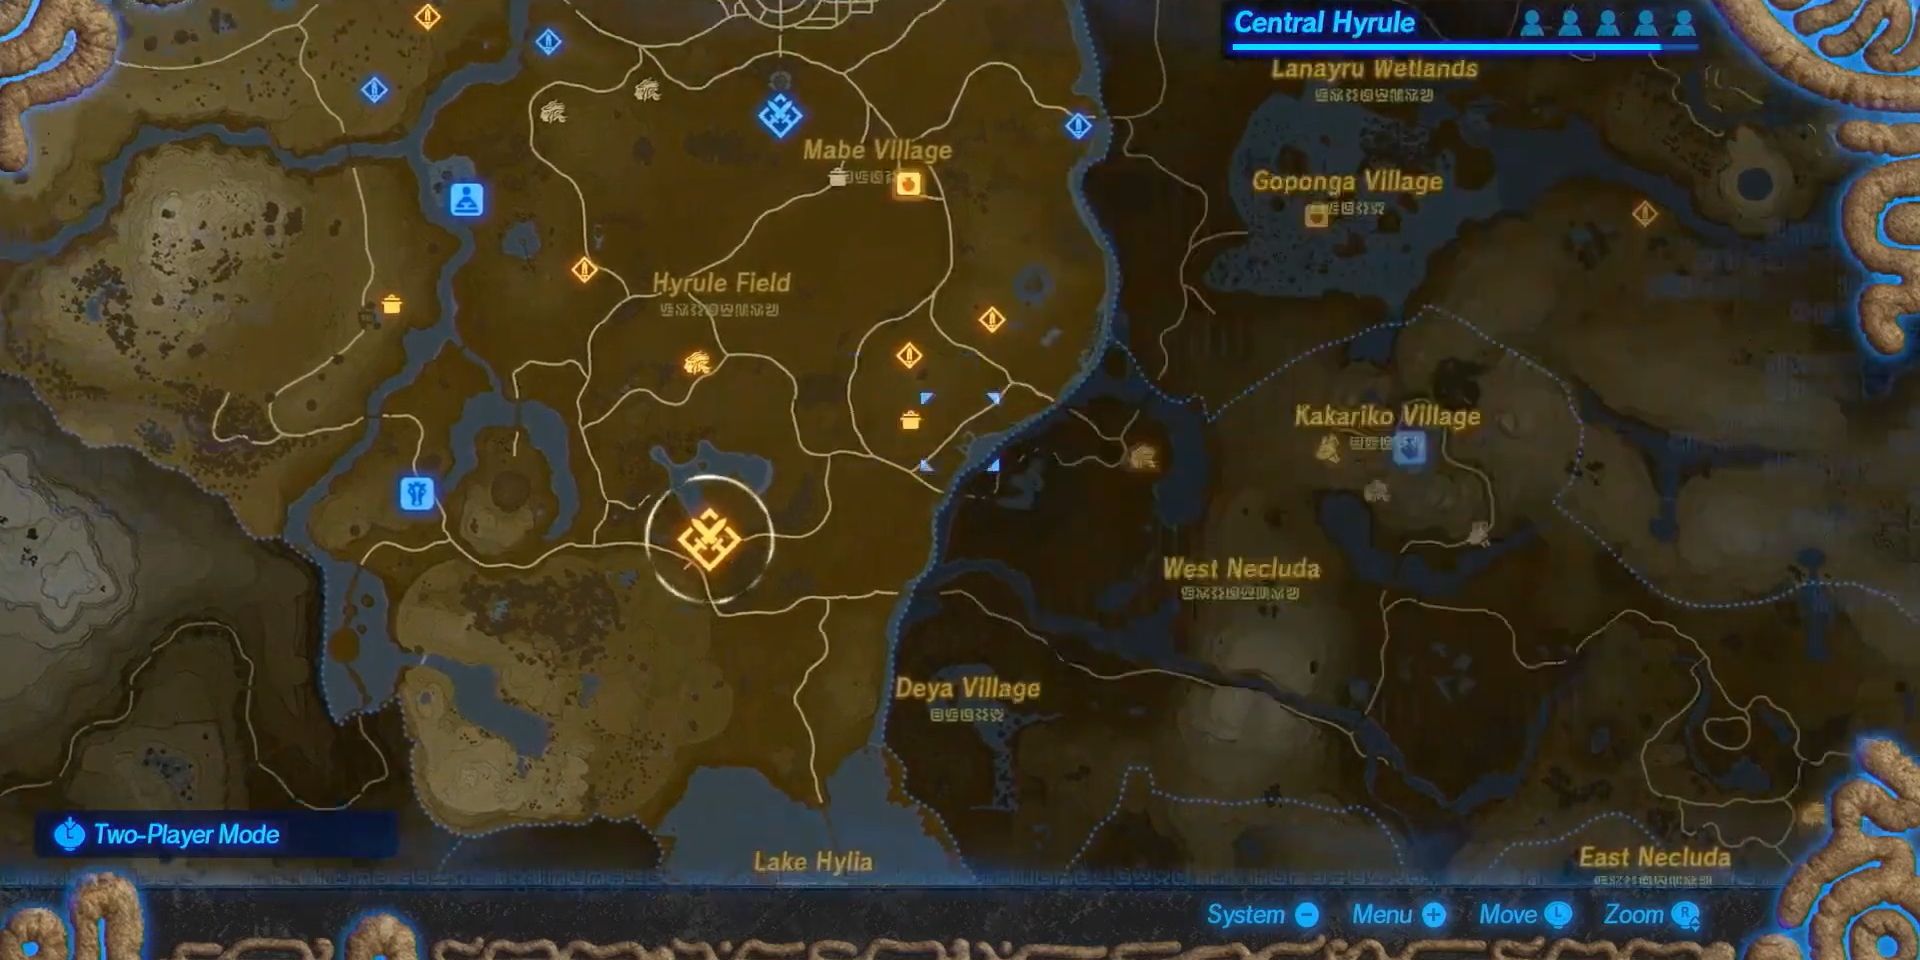 The map that acts as a main menu for Hyrule Warriors: Age of Calamity.